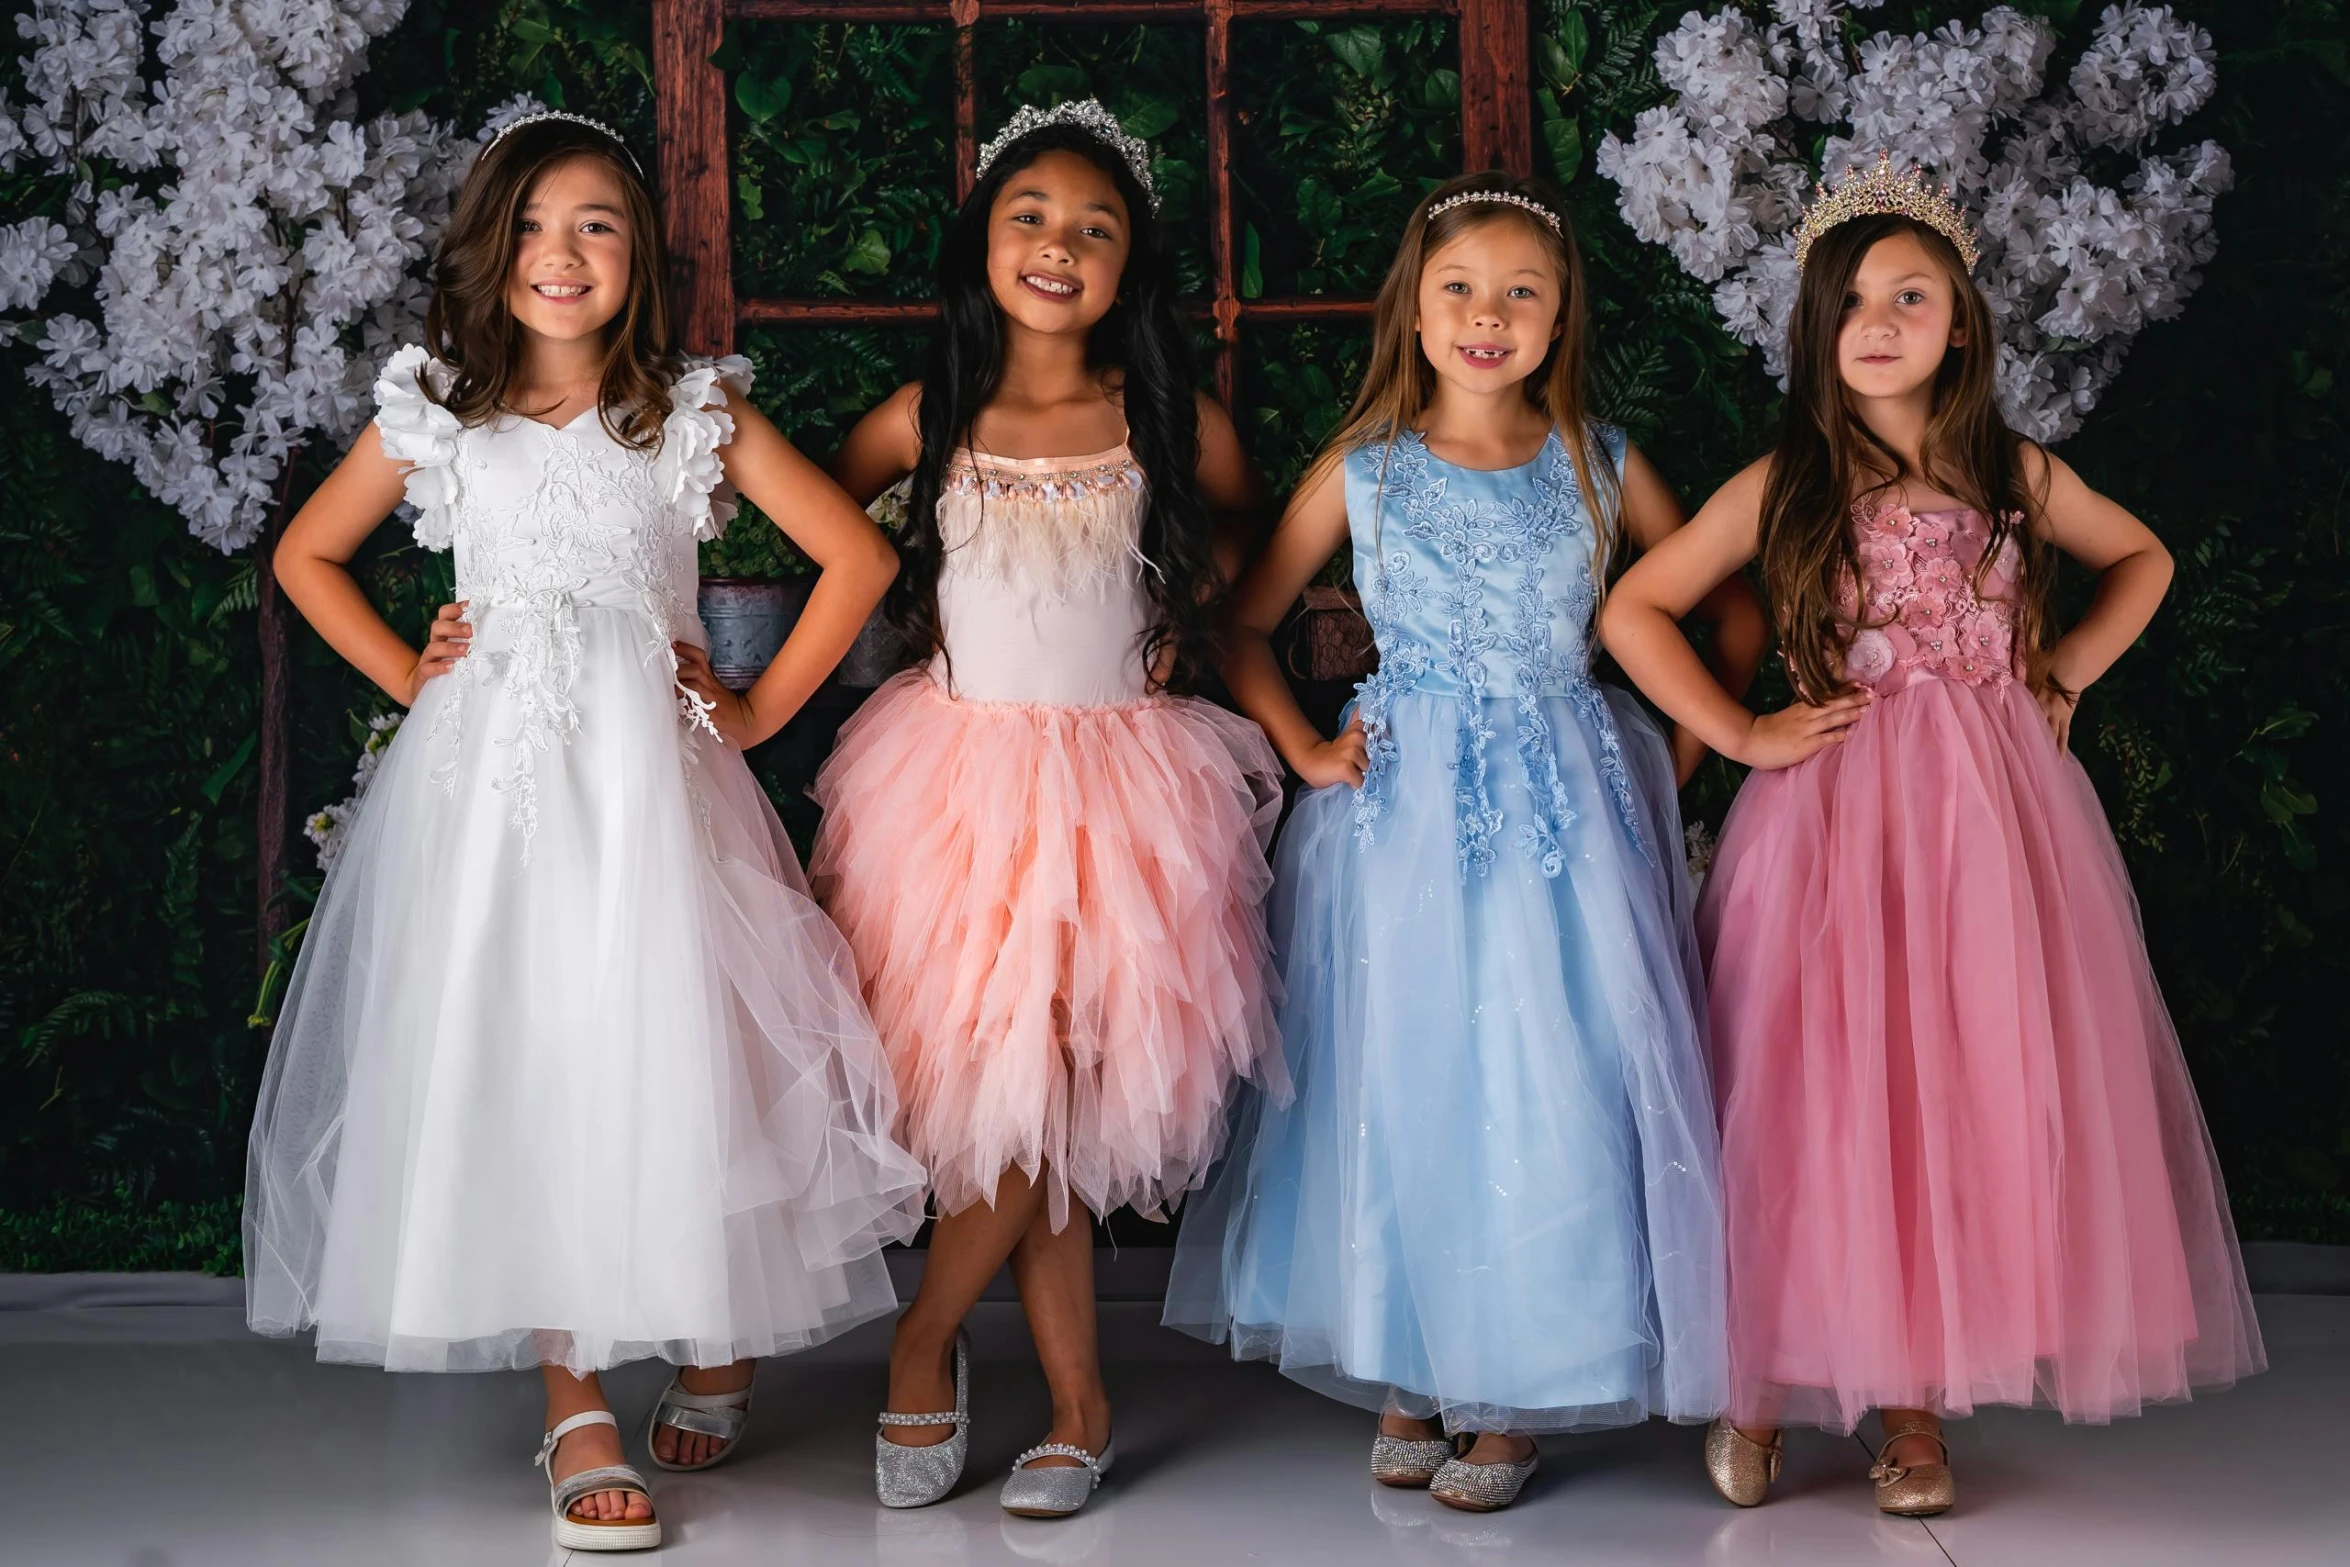 the four little girls are posing in their dresses